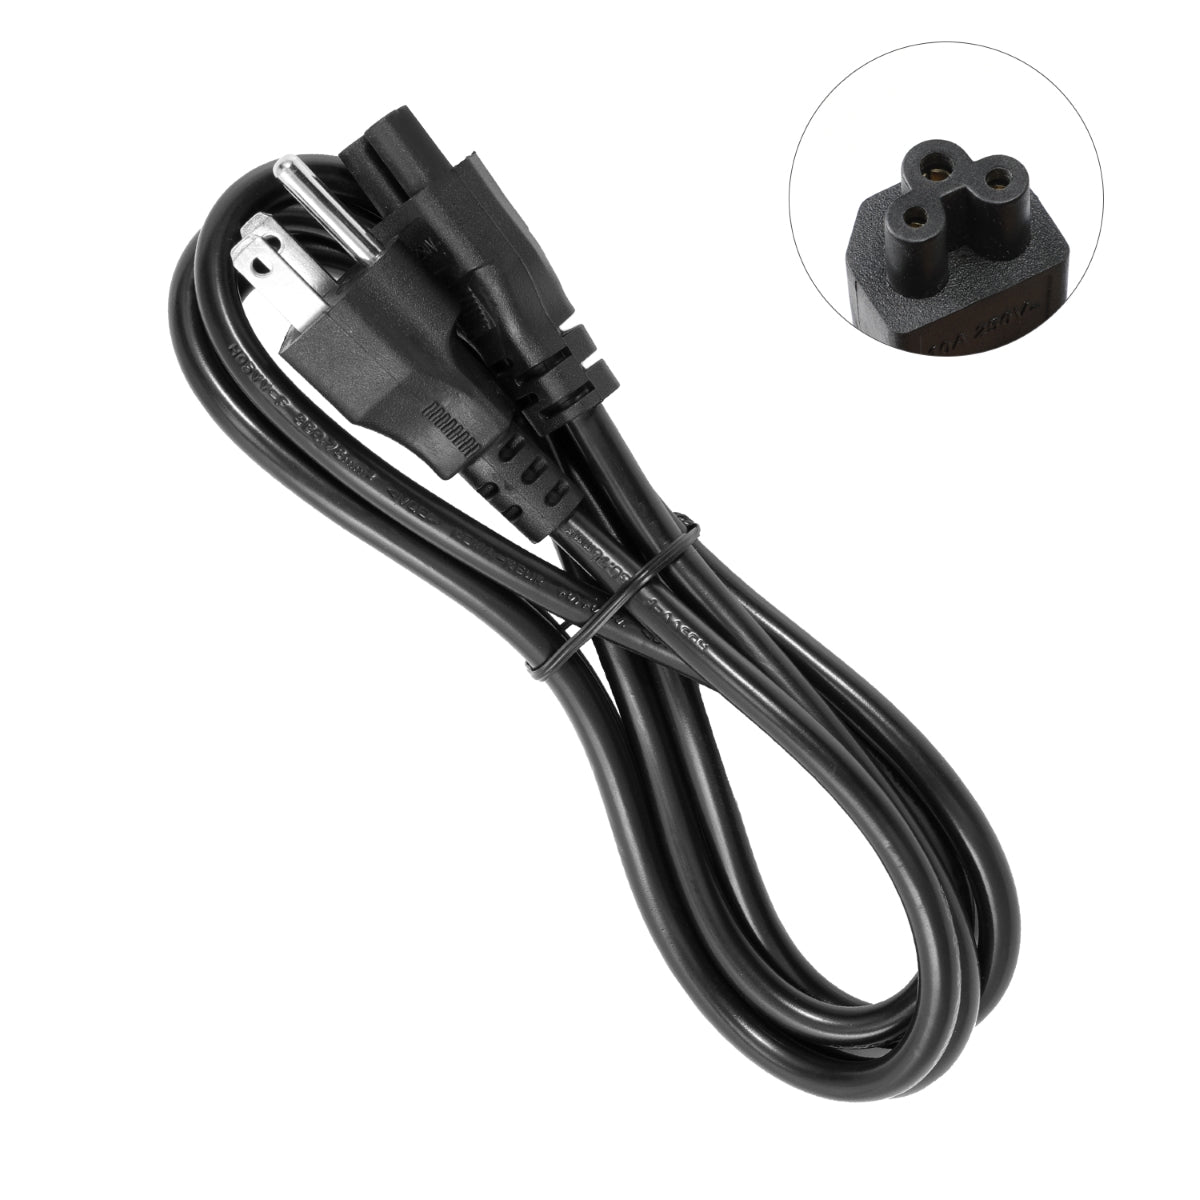 Power Cord for LG 42LB5600 Monitor.